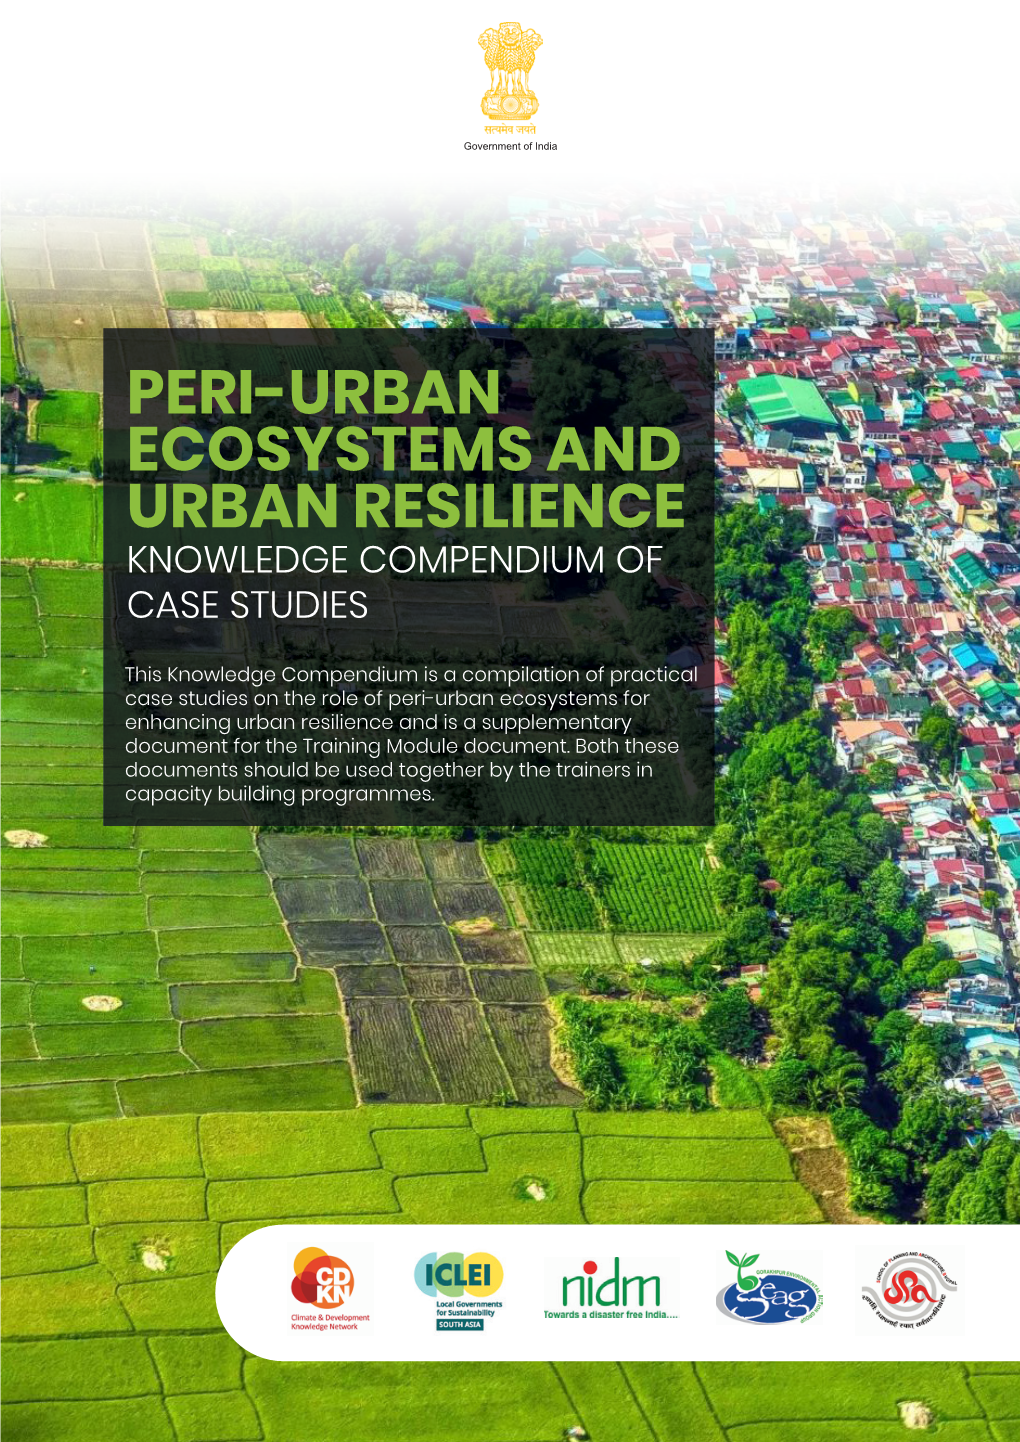 Peri-Urban Ecosystems and Urban Resilience (Knowledge Compendium of Case Studies)